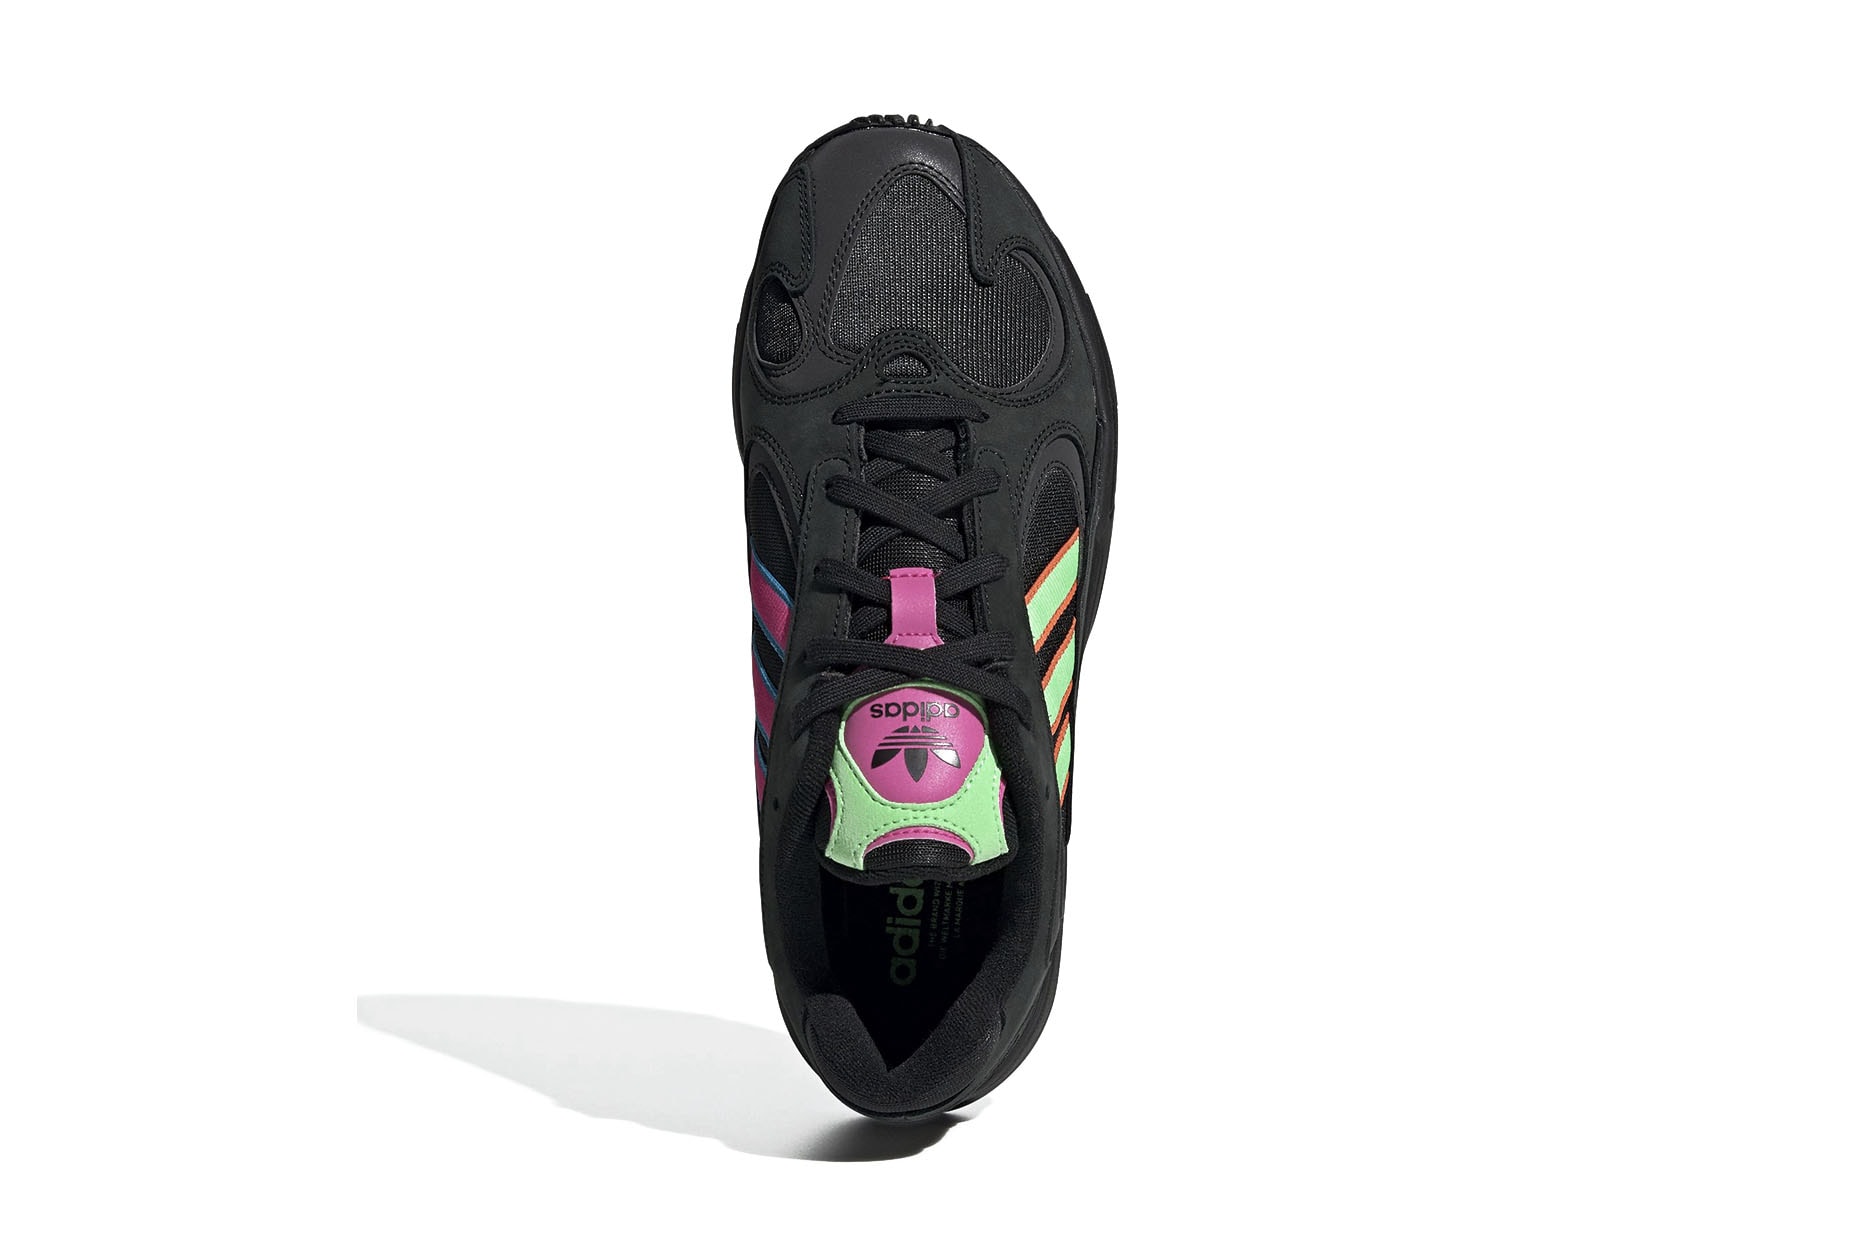 adidas Yung-1 in "Black/Neon Green/Pink" Chunky Sneaker Neon Trend Shoe Black Spring Summer